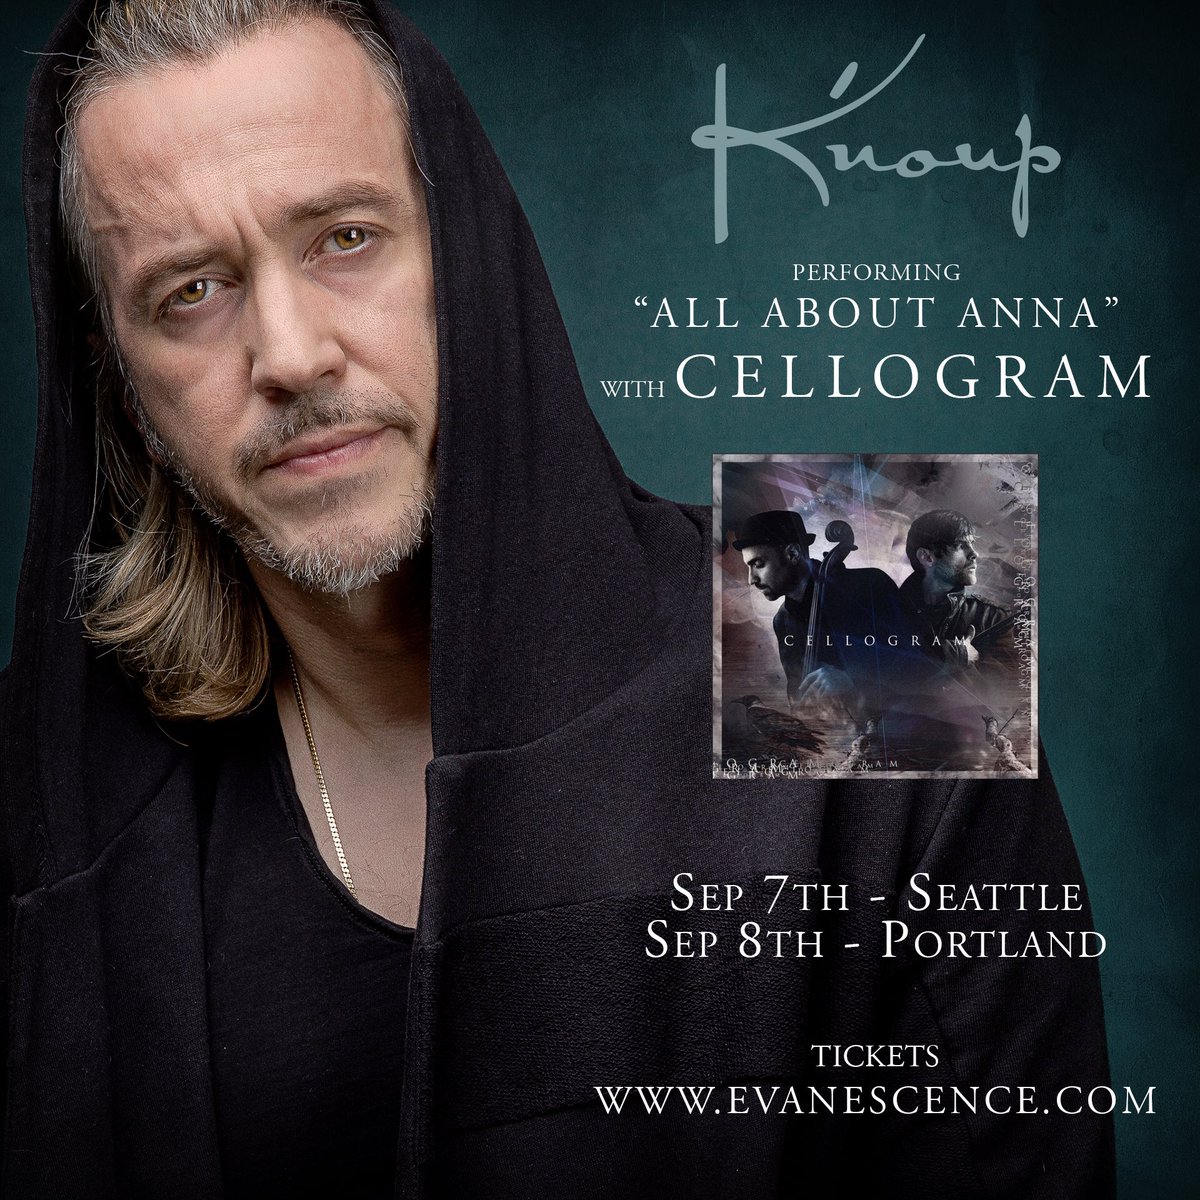 Performing ‘All About Anna’ this weekend with @cellogram99 in Seattle and Portland • tickets on sale Evanescence.com #cellogram #evanescence